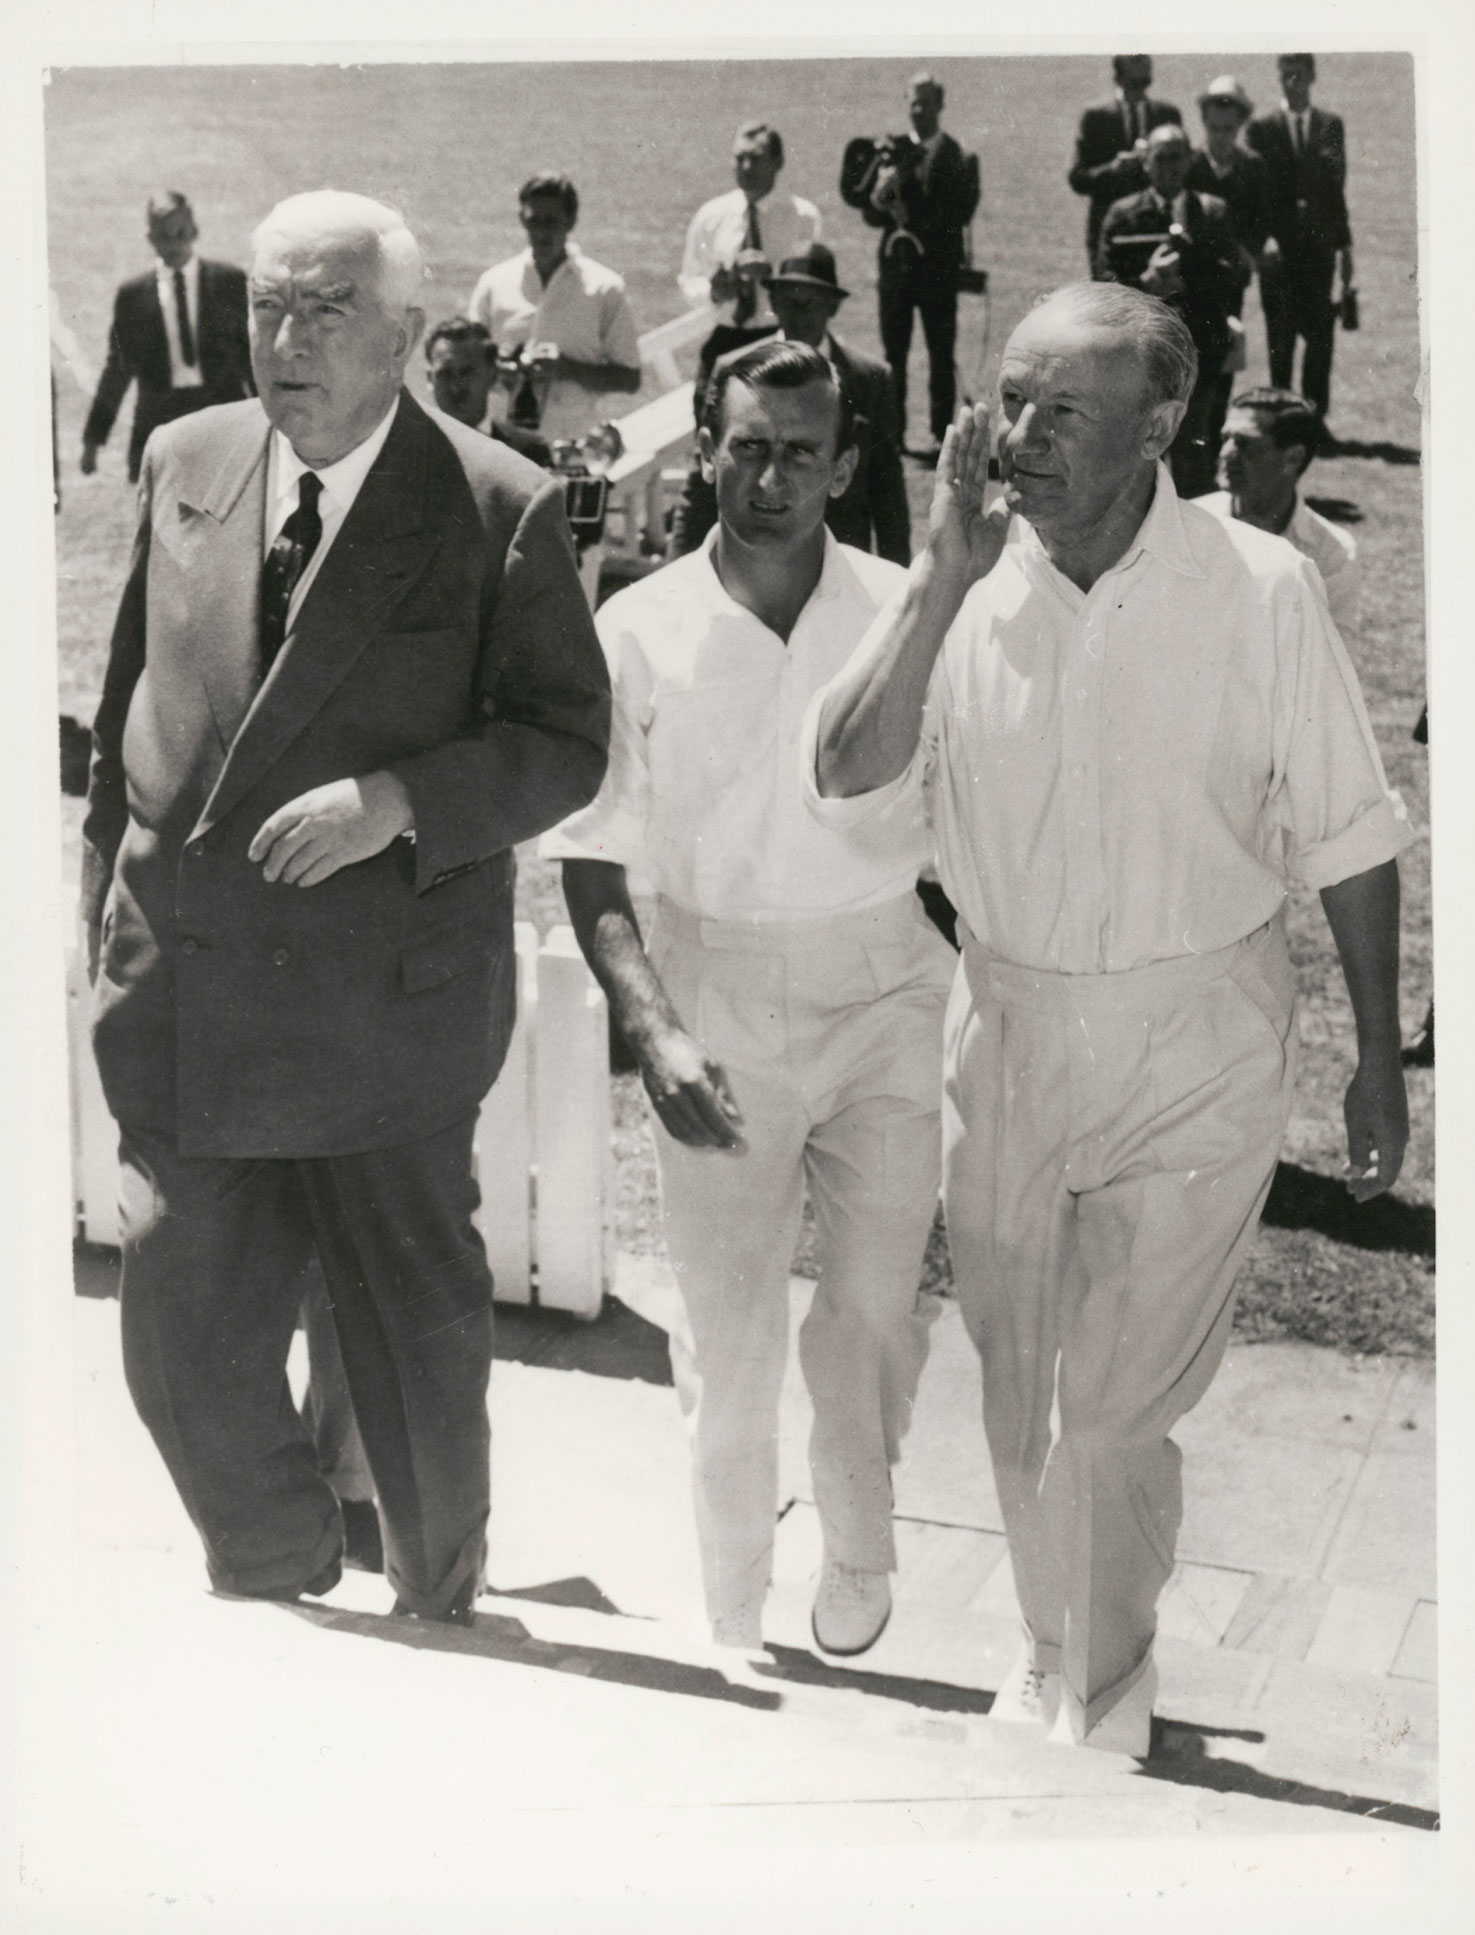 Sir Robert Menzies (left) with cricketers Ted Dexter and Don Bradman (right) at Manuka Oval, Canberra, 1963.